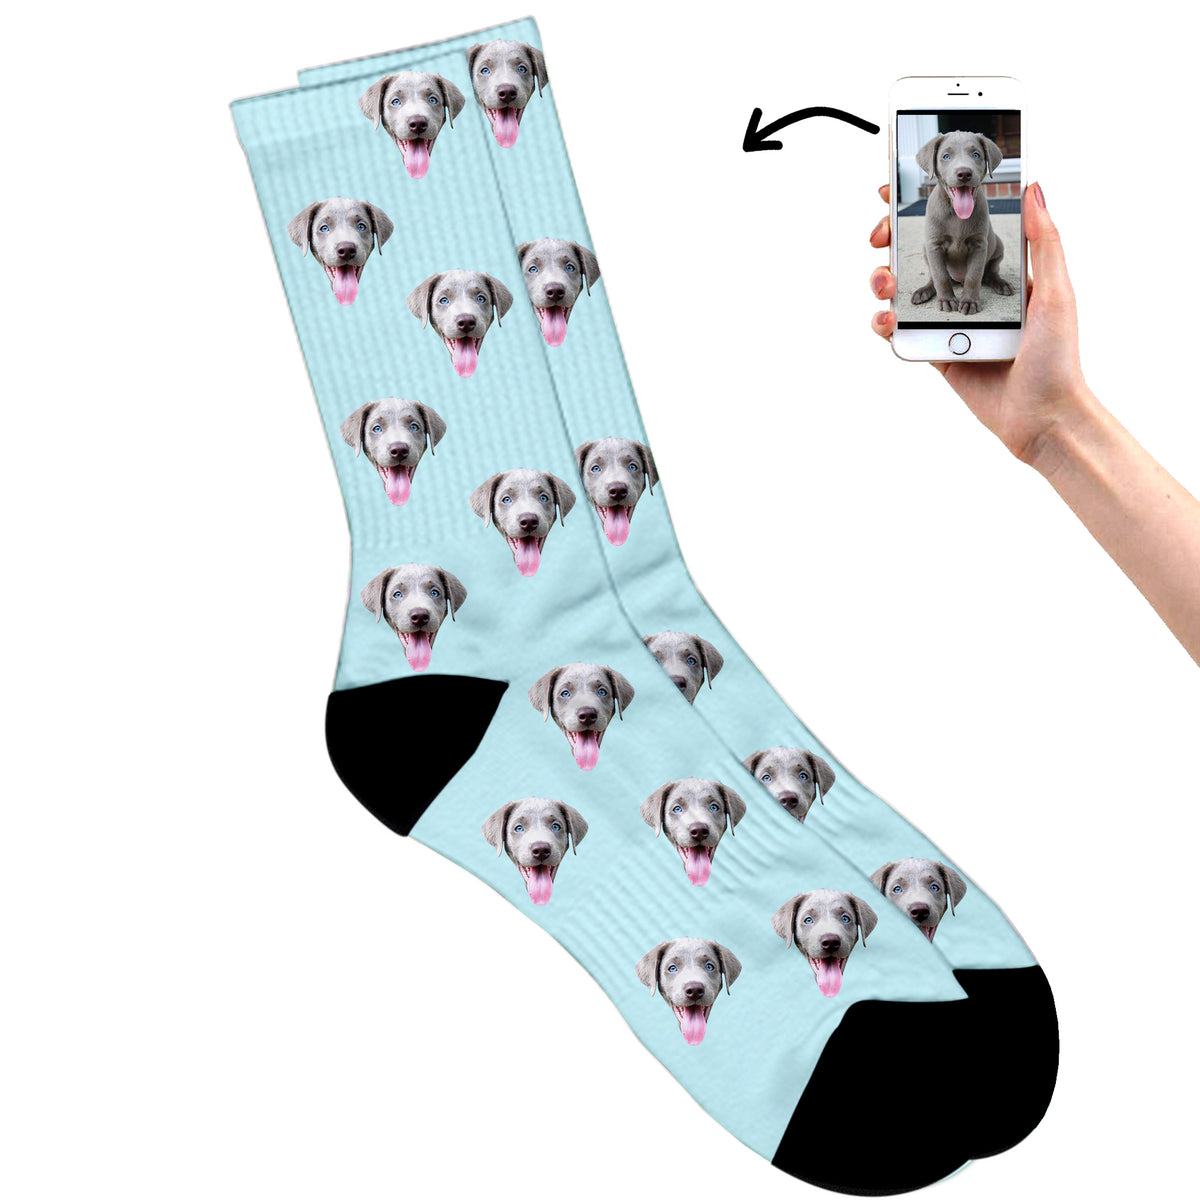 Dog Socks - We Print Your Dogs Face On a Pair of Custom ...